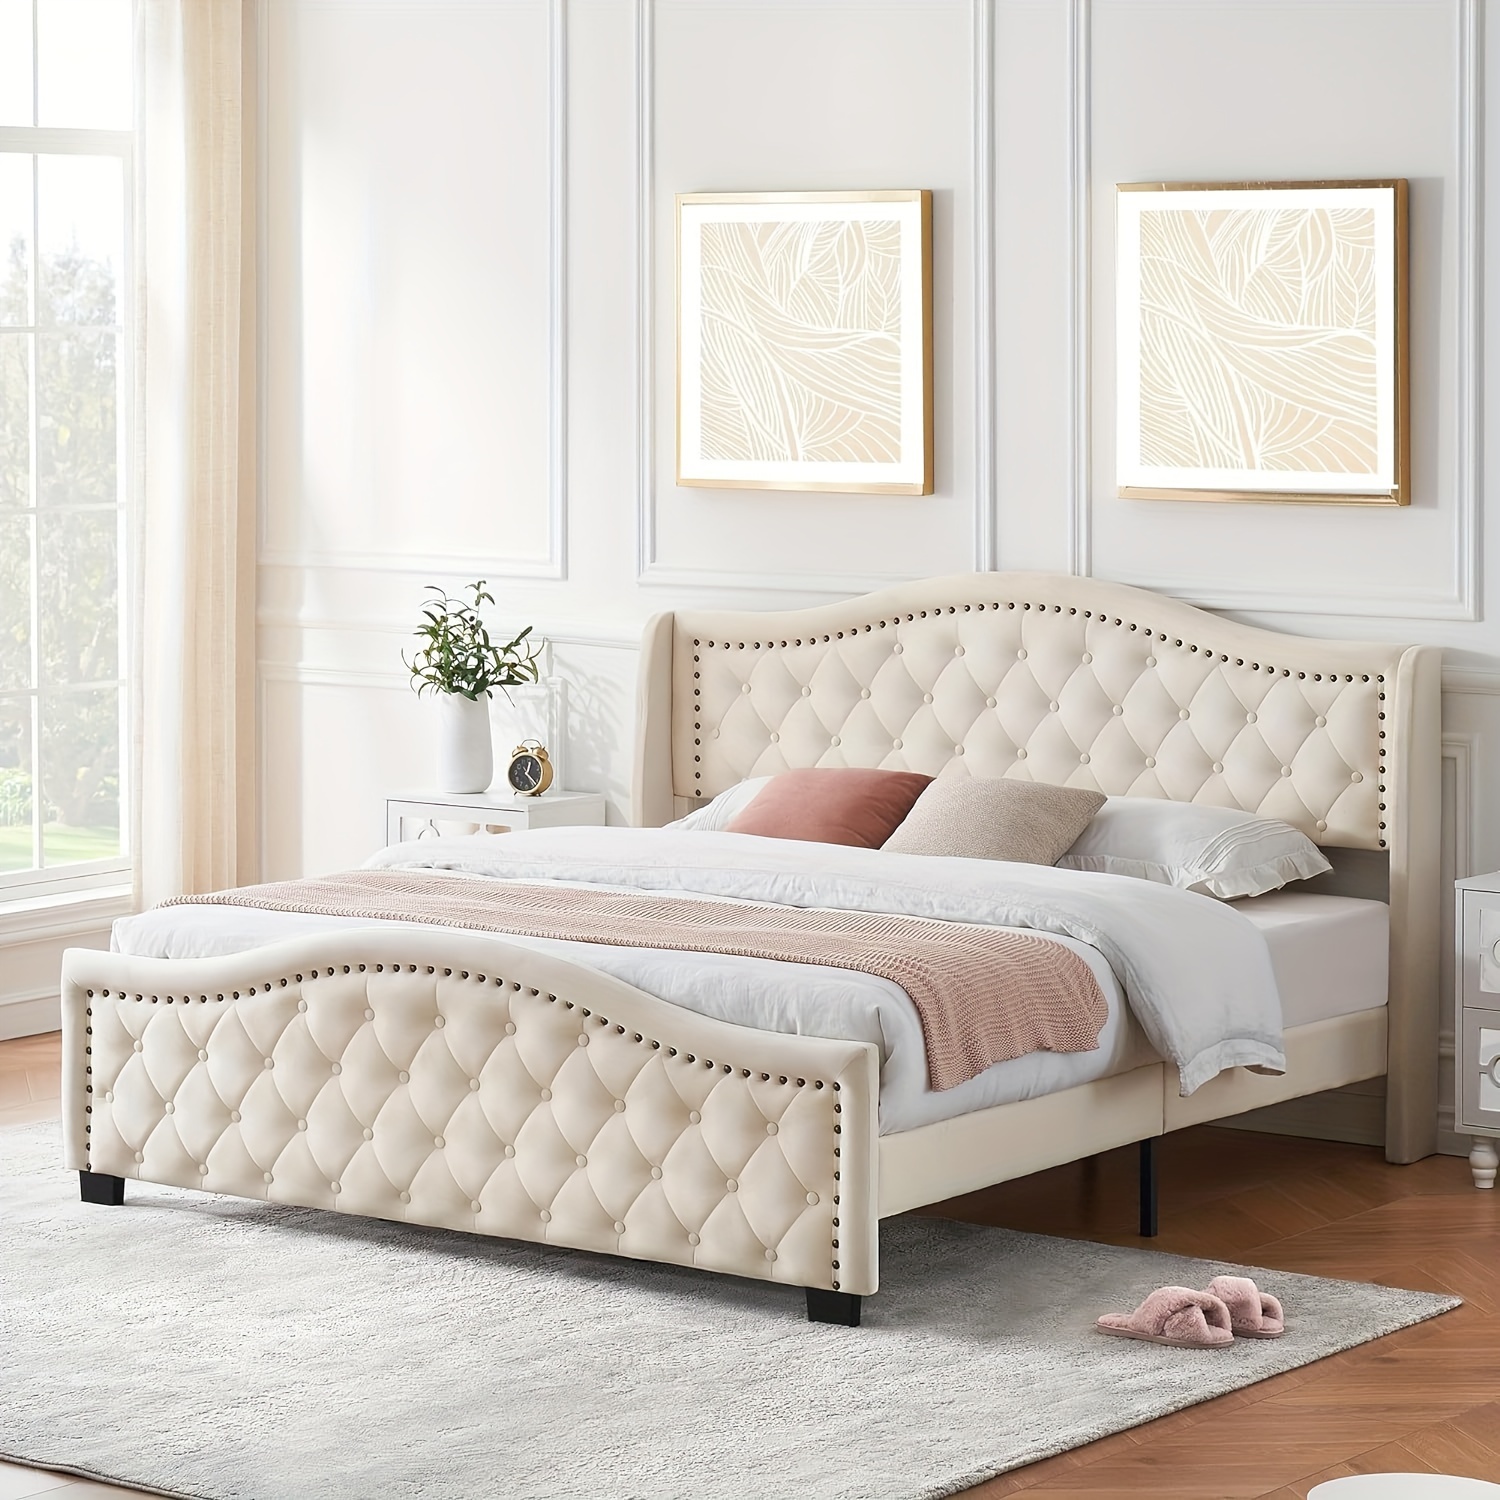 

King Size Upholstered Platform Bed Frame With Tall Headboard 47.2", King Bed With Velvet Button Tufted & Nailhead Trim Wingback Headboard, Luxurious Arched Footboard, Beige